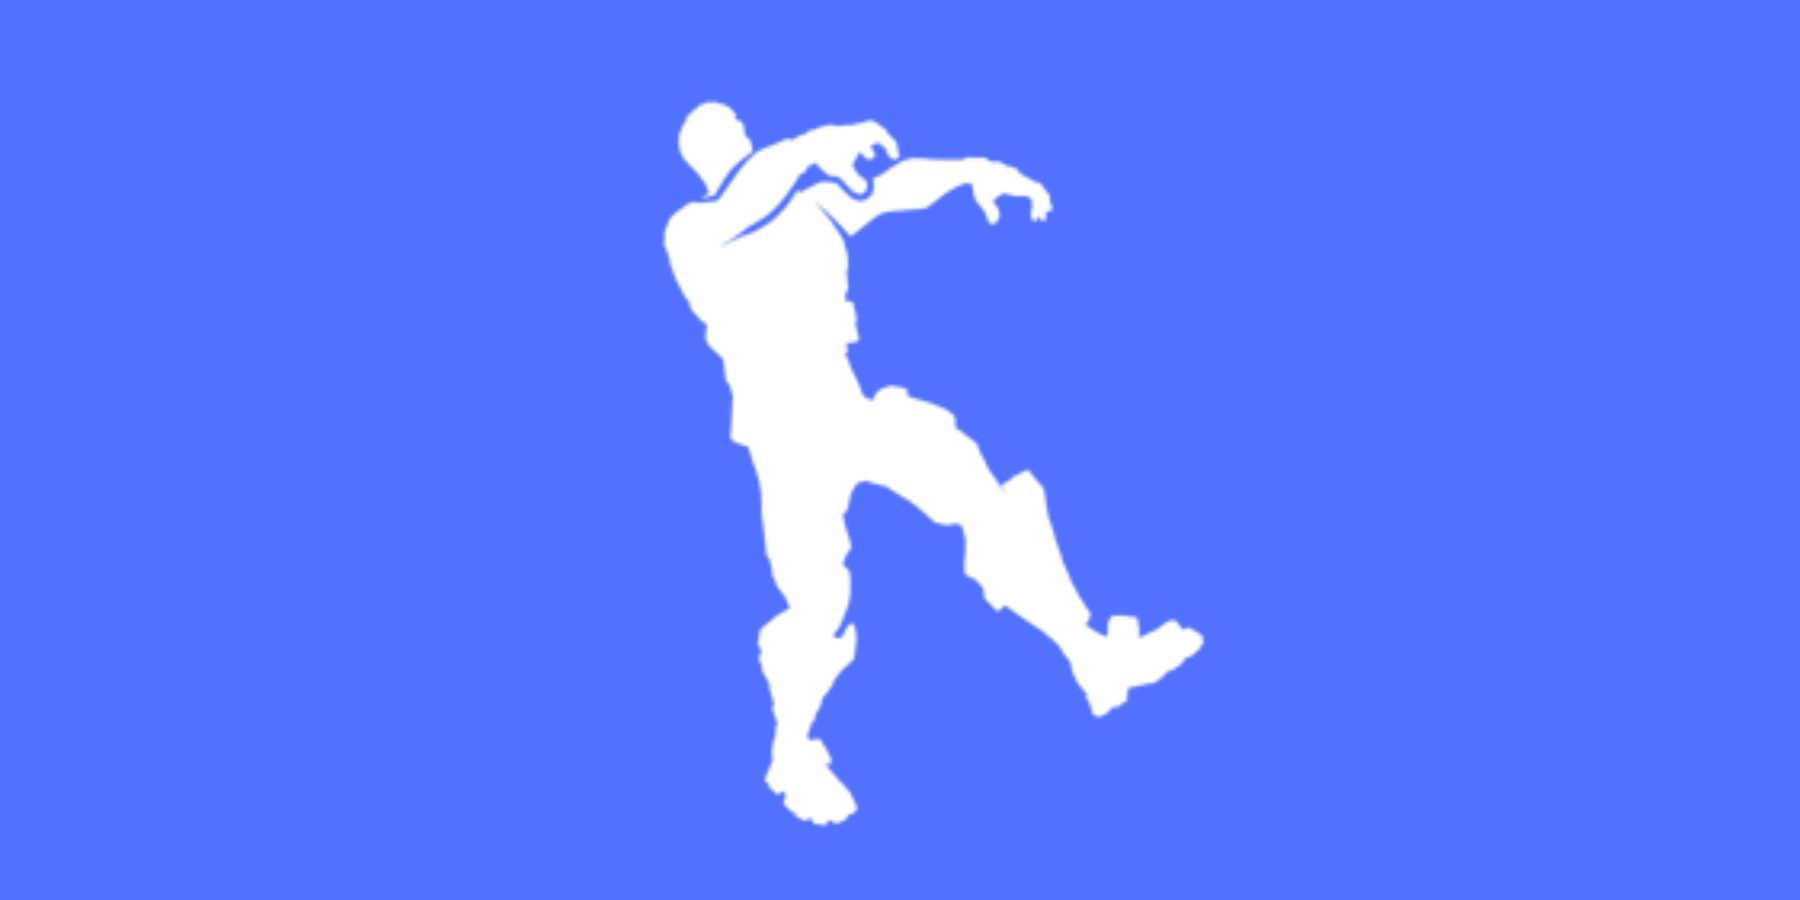 Fortnite shakes up the zombie emote